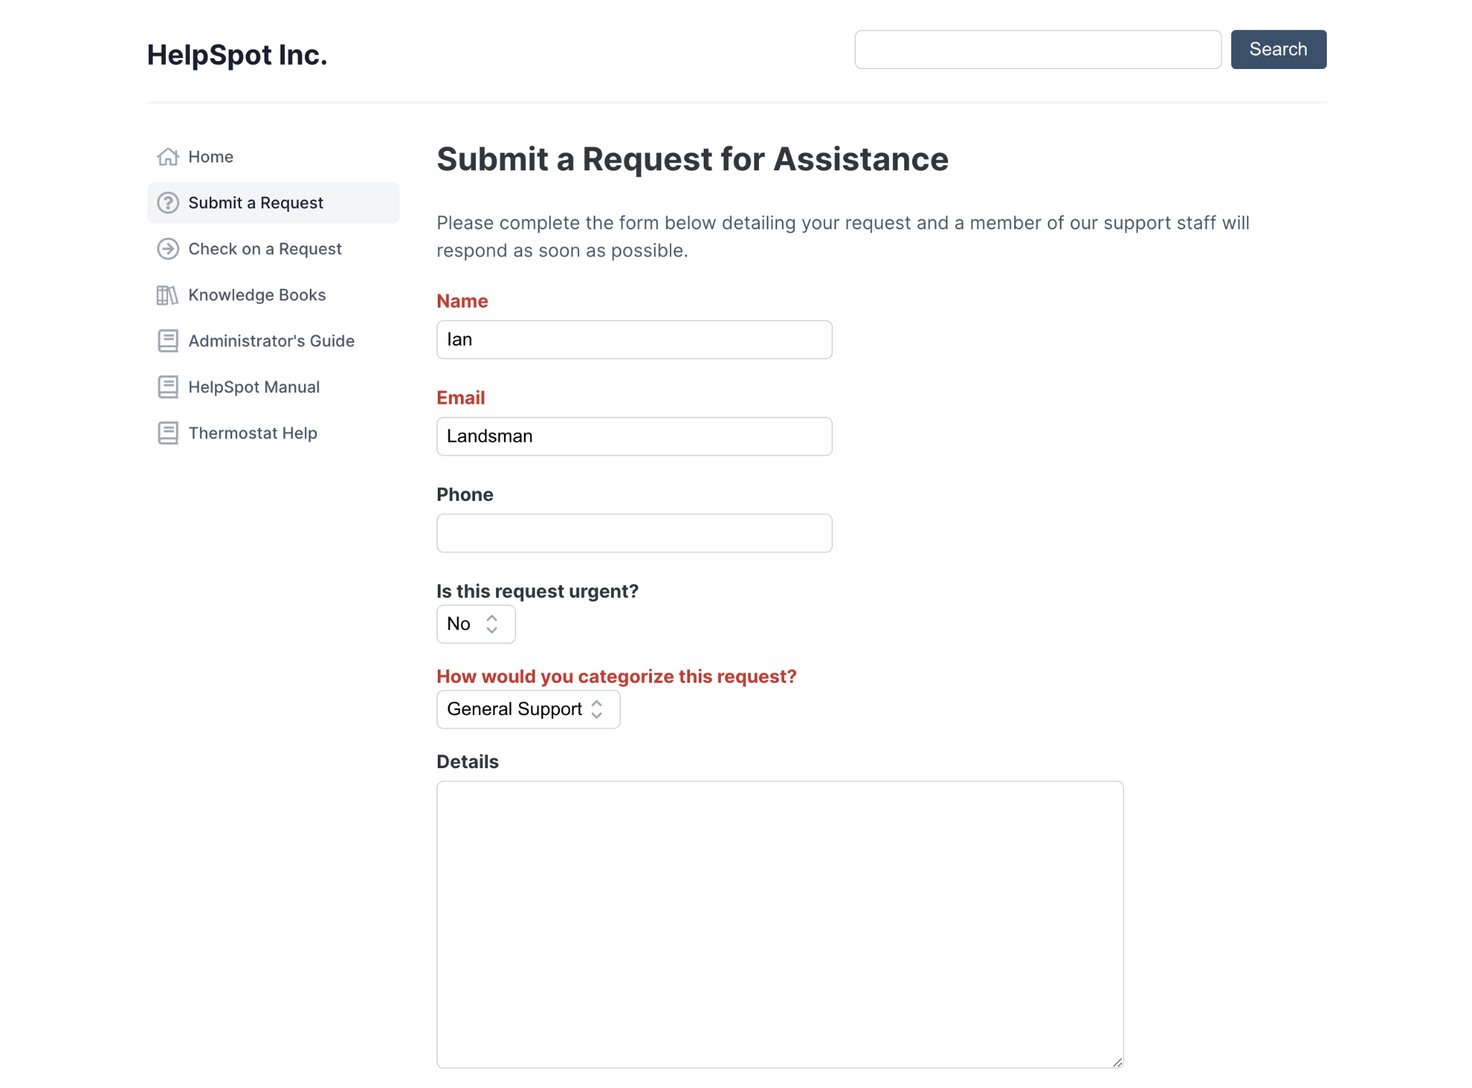 HelpSpot's portal to Submit a Request for Assistance